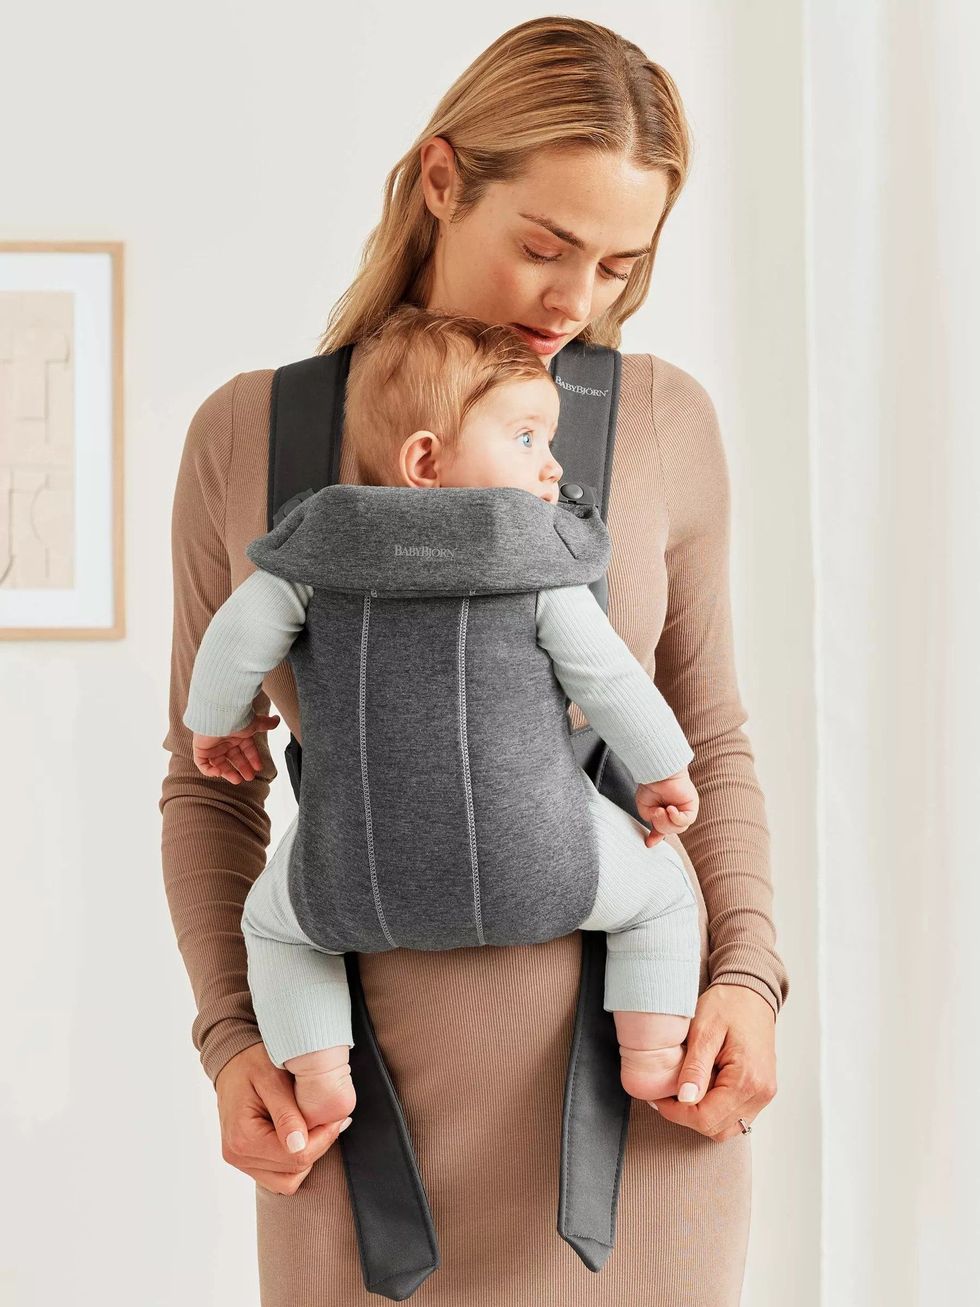  CuddleBug Baby Wrap - Hands-Free Baby Carrier Wrap - Soft &  Stretchy Baby Wraps Carrier - Baby Carrier Newborn to Toddler 7-35 lbs -  One-Size-Fits-All Baby Holder Wrap - Hip-Healthy